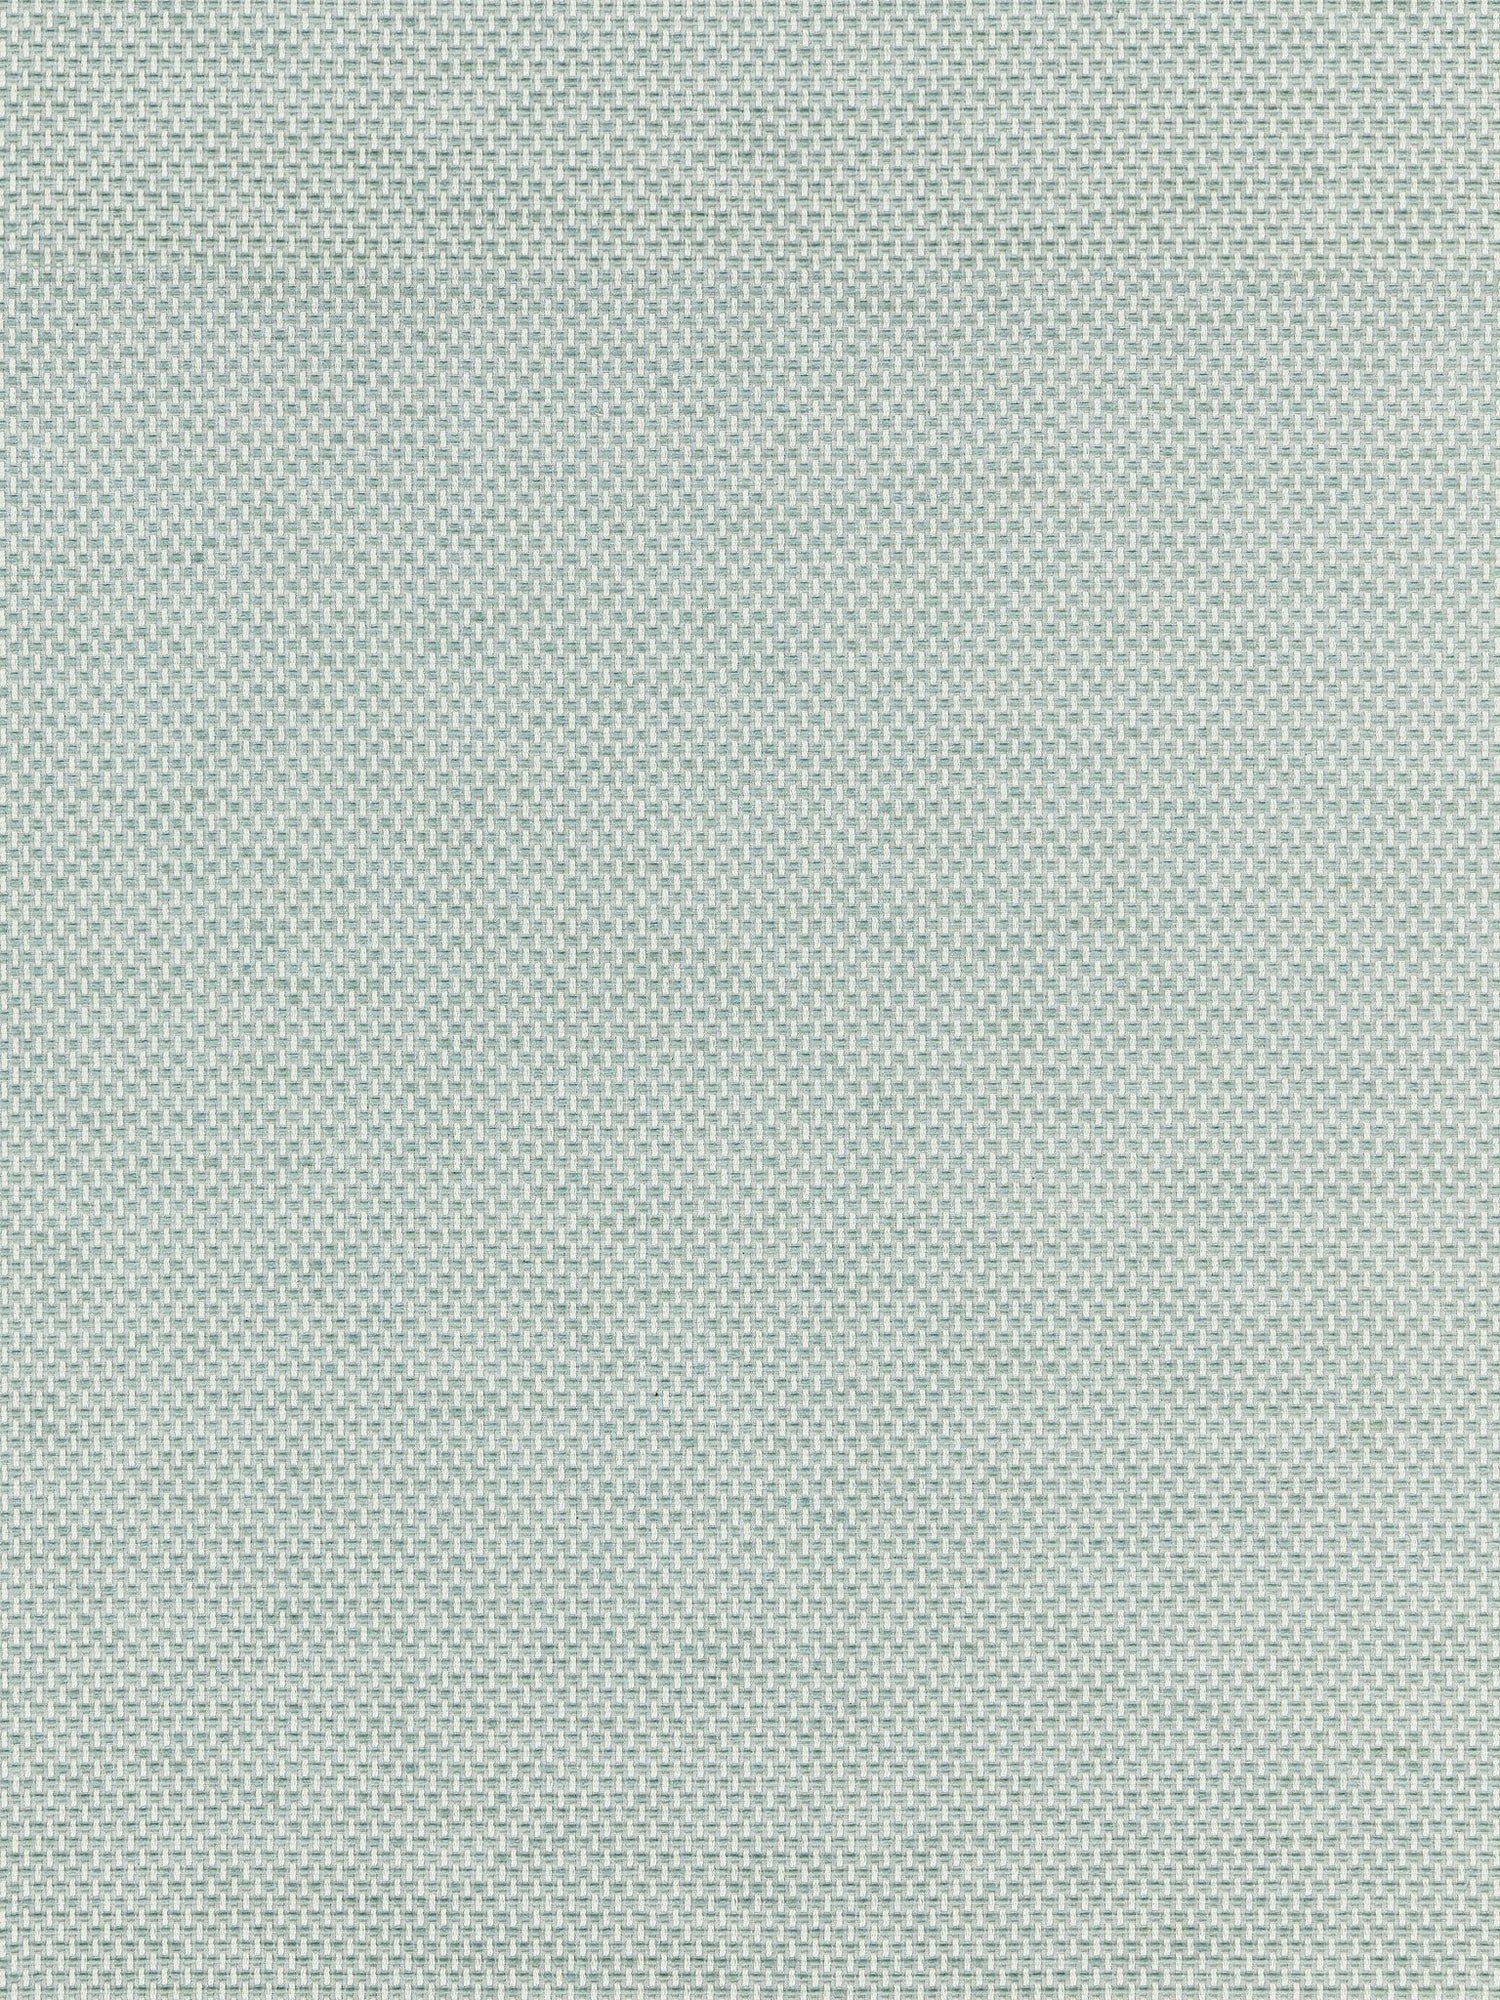 Berkshire Weave fabric in mineral color - pattern number BK 0006K65115 - by Scalamandre in the Old World Weavers collection